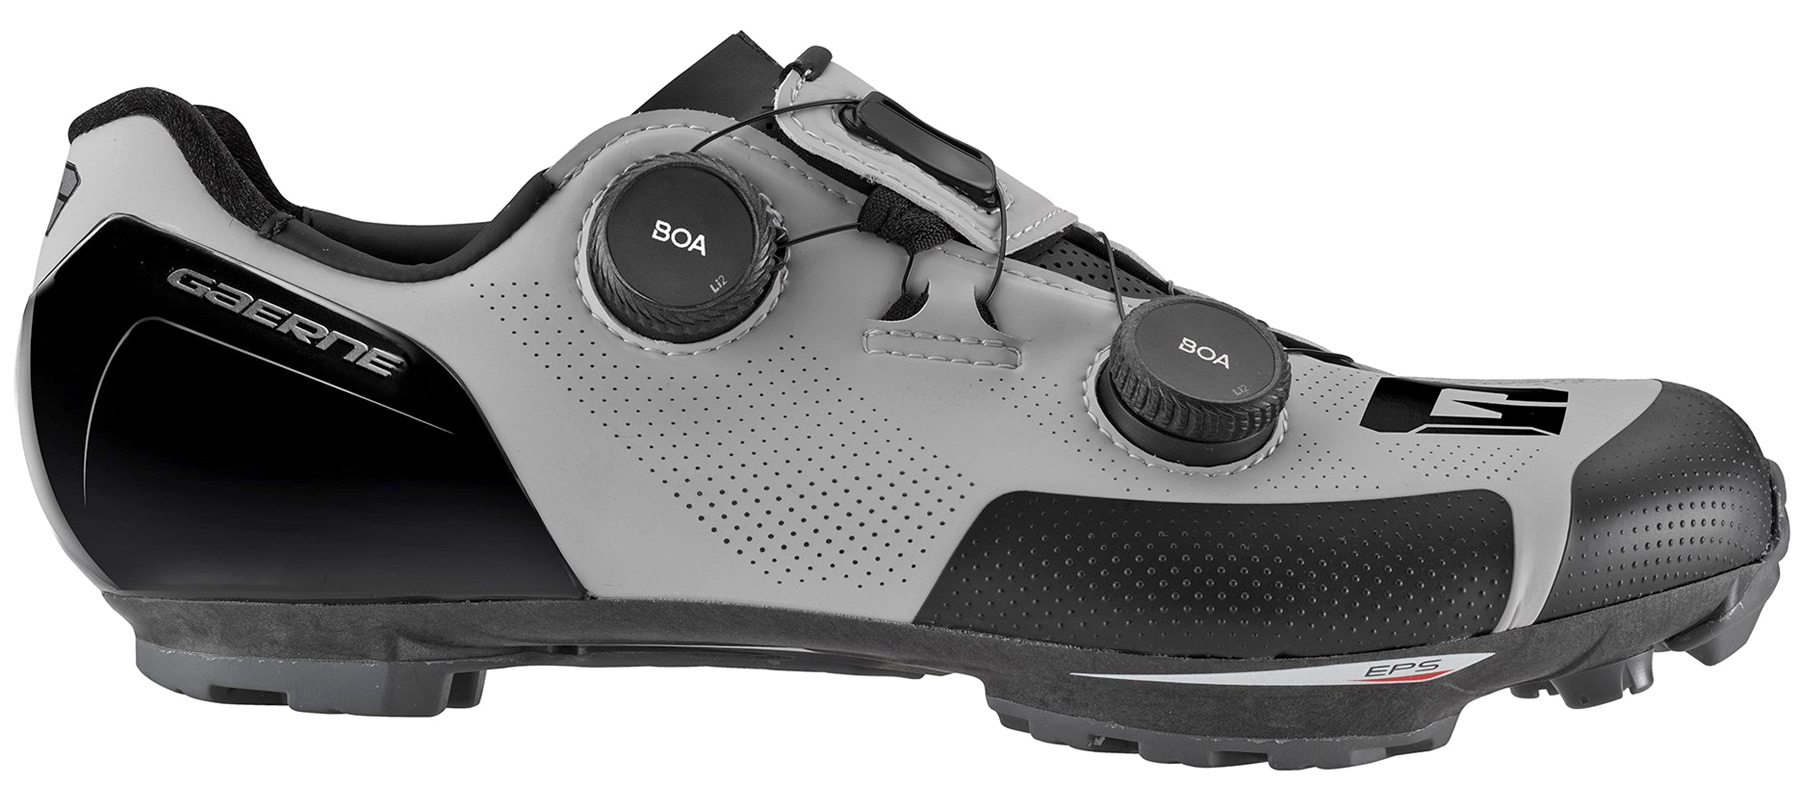 Gaerne G.SNX XC MTB shoes, top-tier race performance carbon cross-country mountain bike shoe, grey side